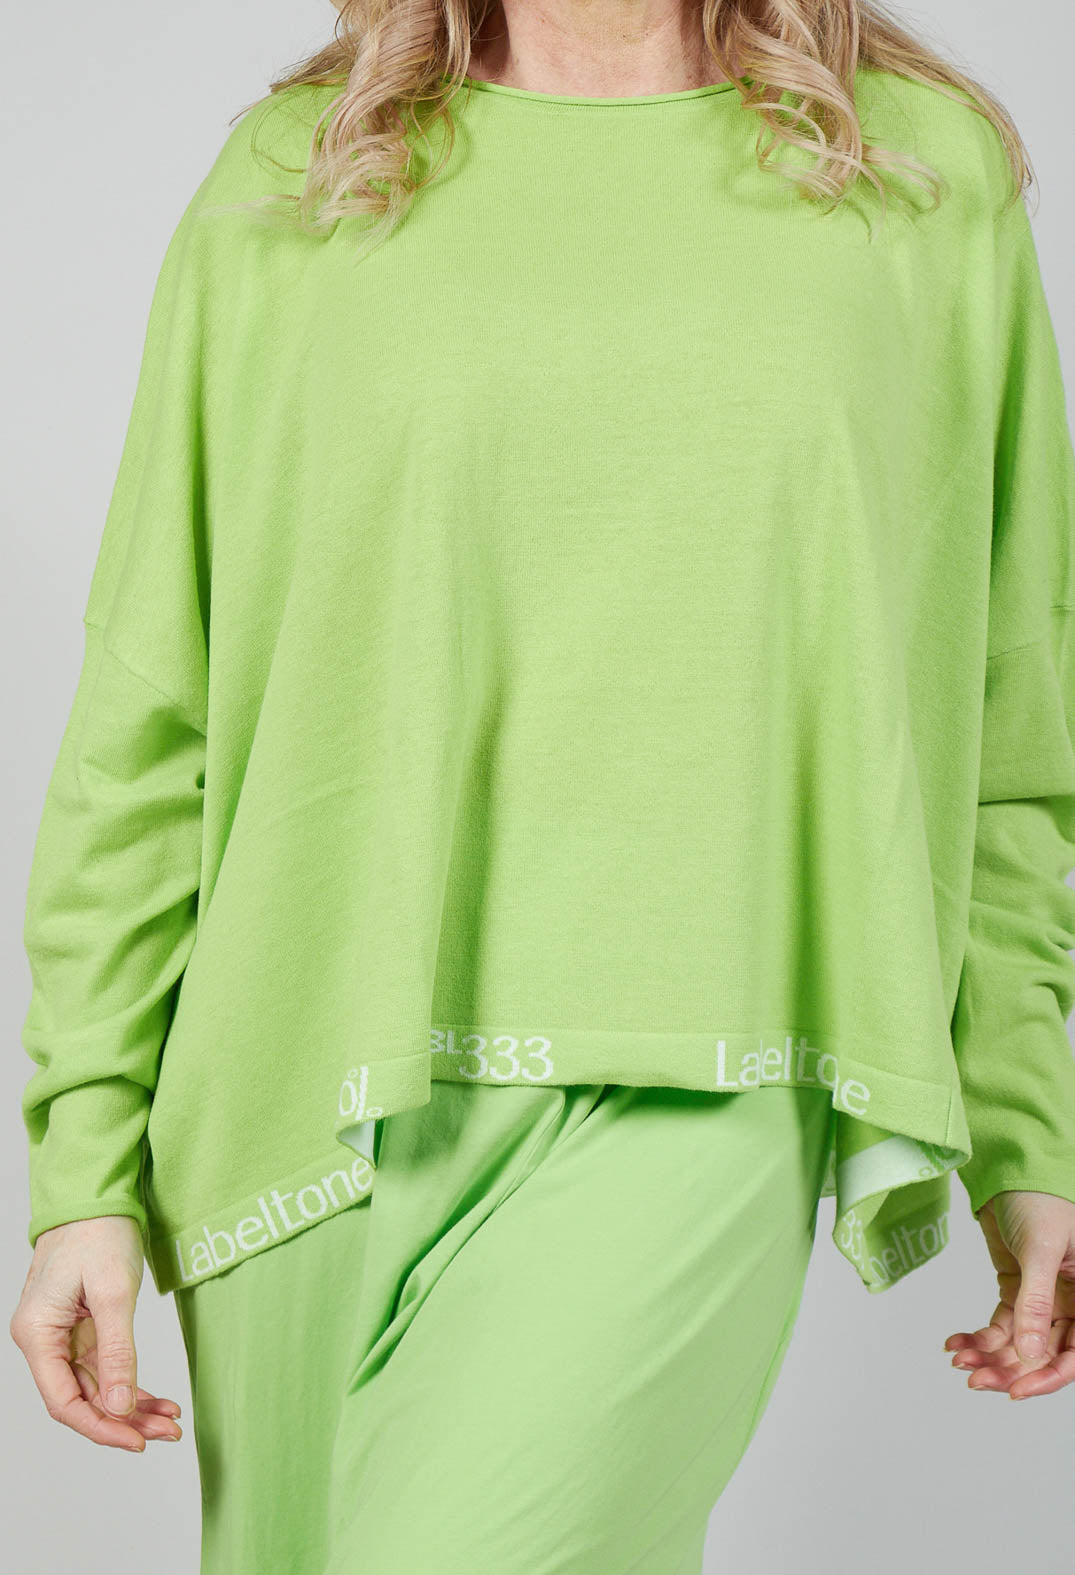 Relaxed Fit Long Sleeve Top in Lime Jacquard